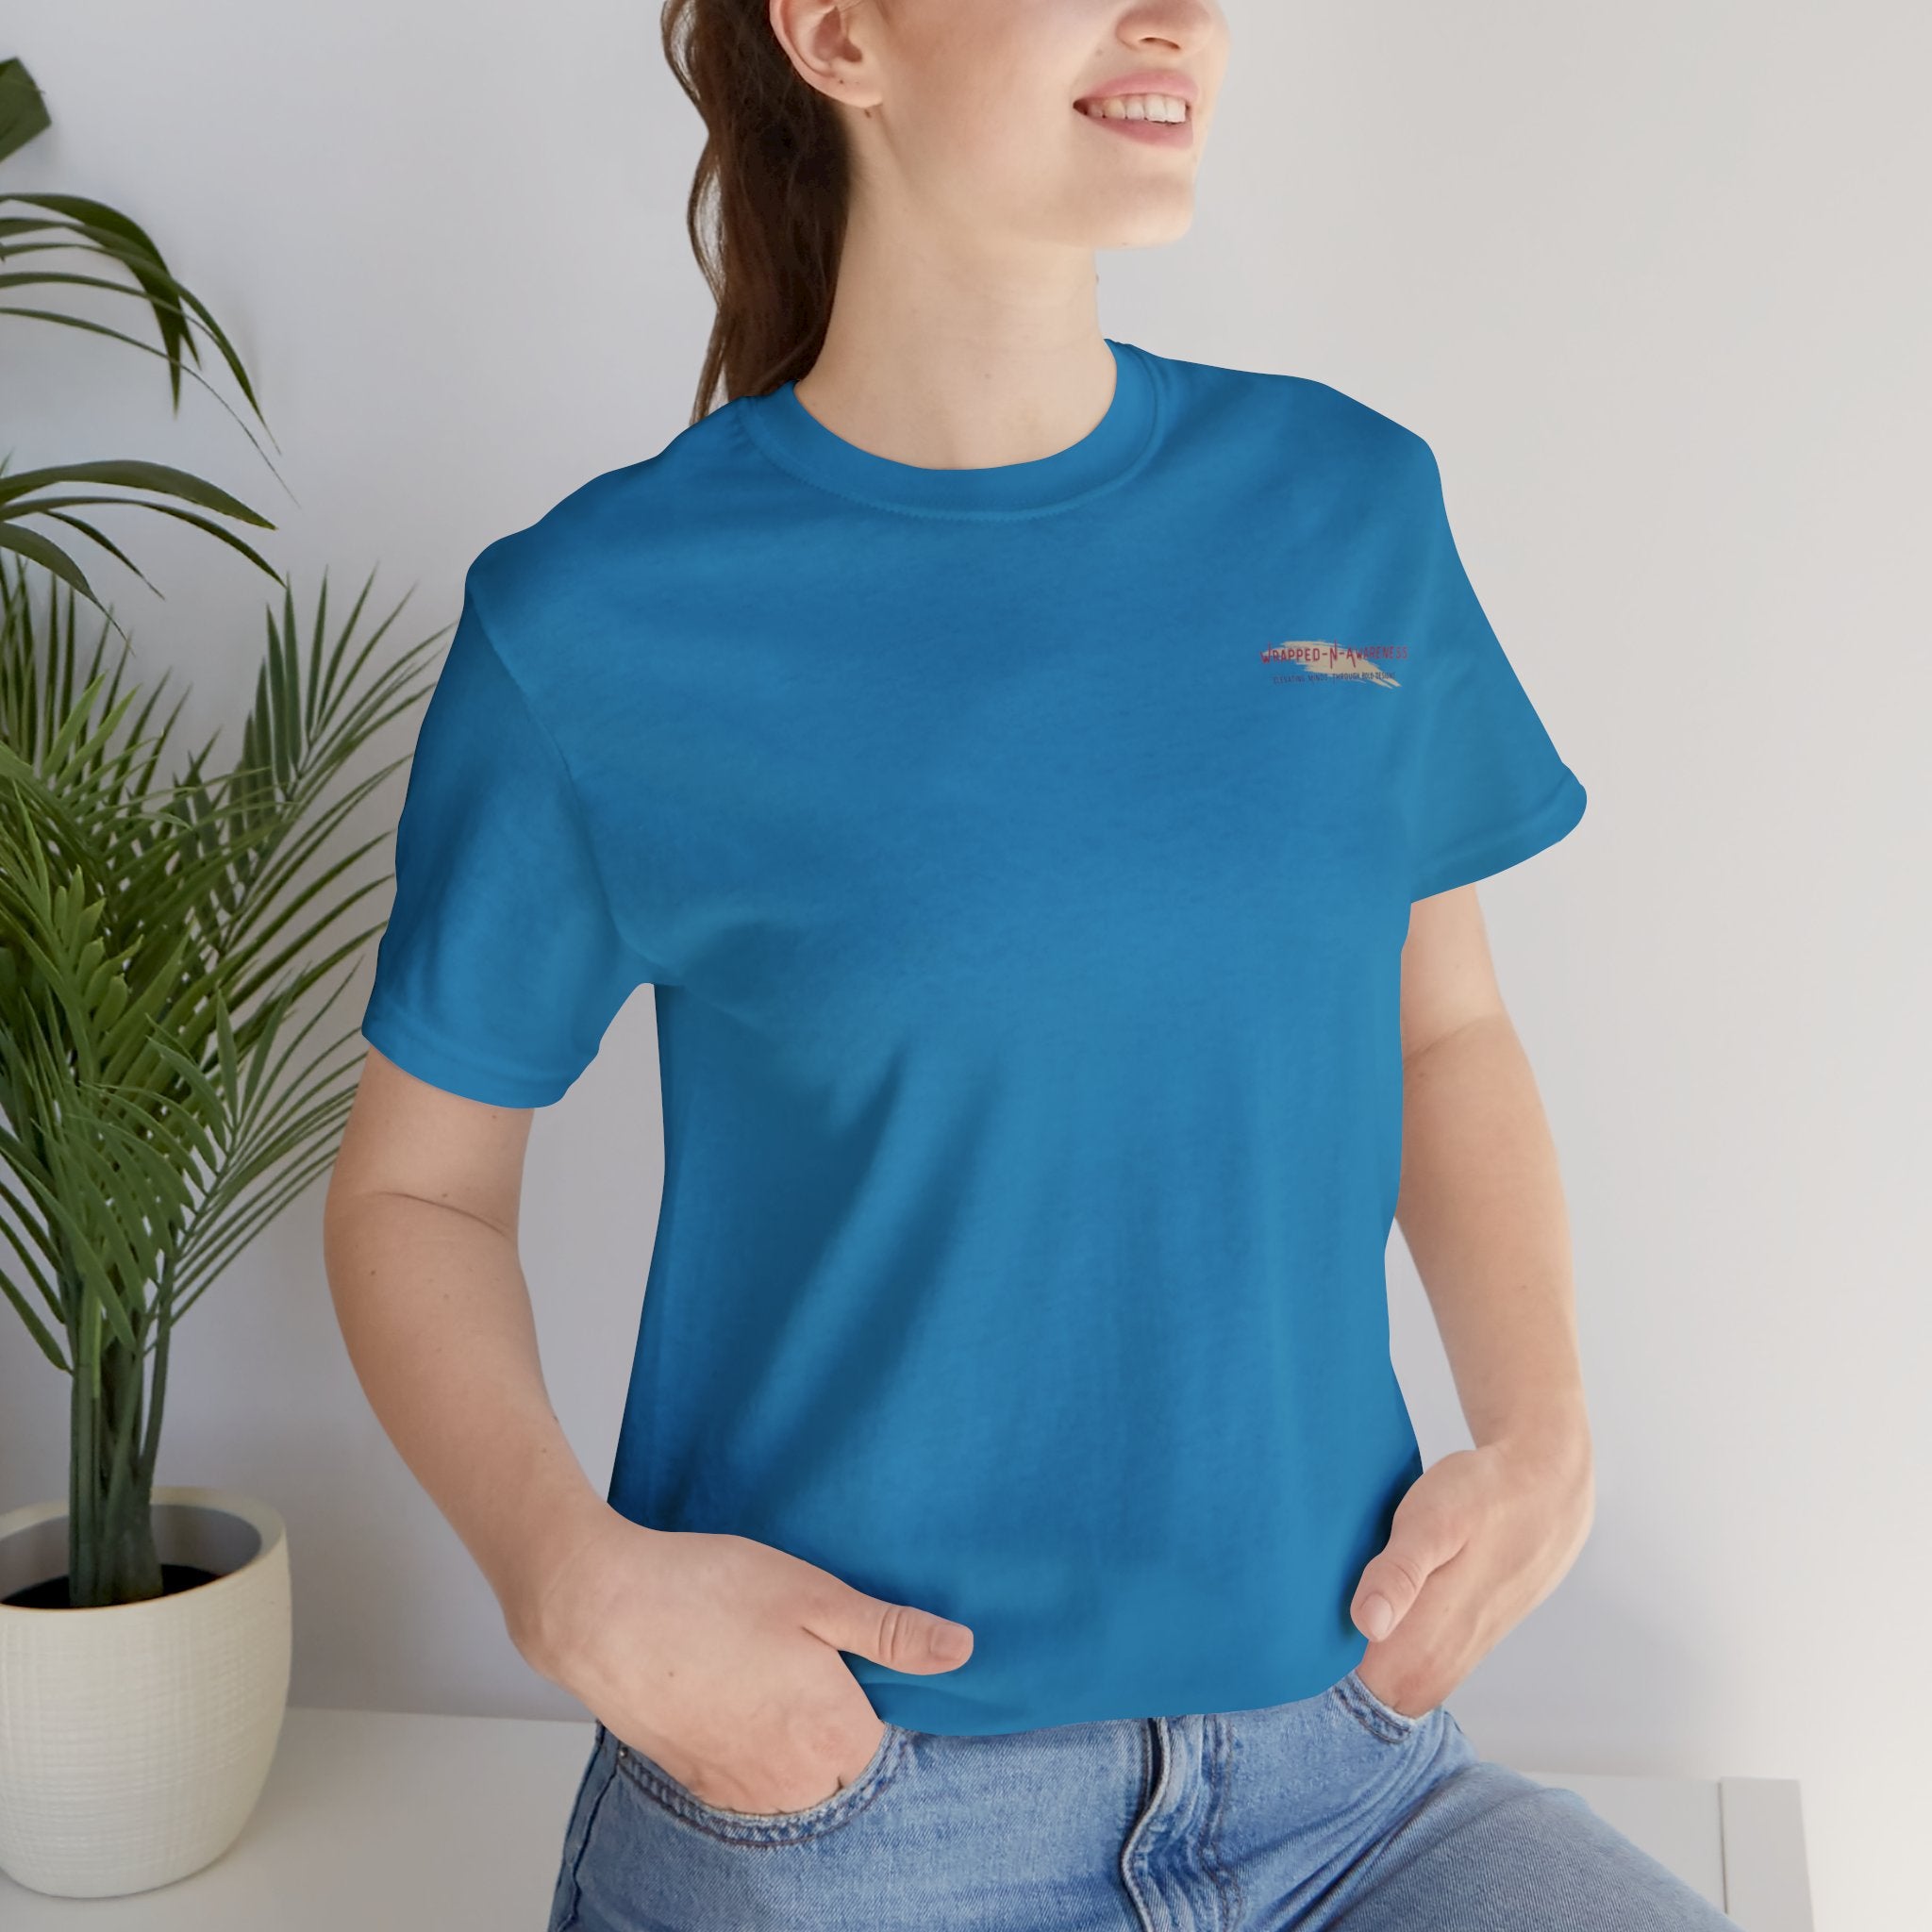 Progress Over Perfection Tee - Bella+Canvas 3001 Yellow Airlume Cotton Bella+Canvas 3001 Crew Neckline Jersey Short Sleeve Lightweight Fabric Mental Health Support Retail Fit Tear-away Label Tee Unisex Tee T-Shirt 15482122001370716031_2048 Printify